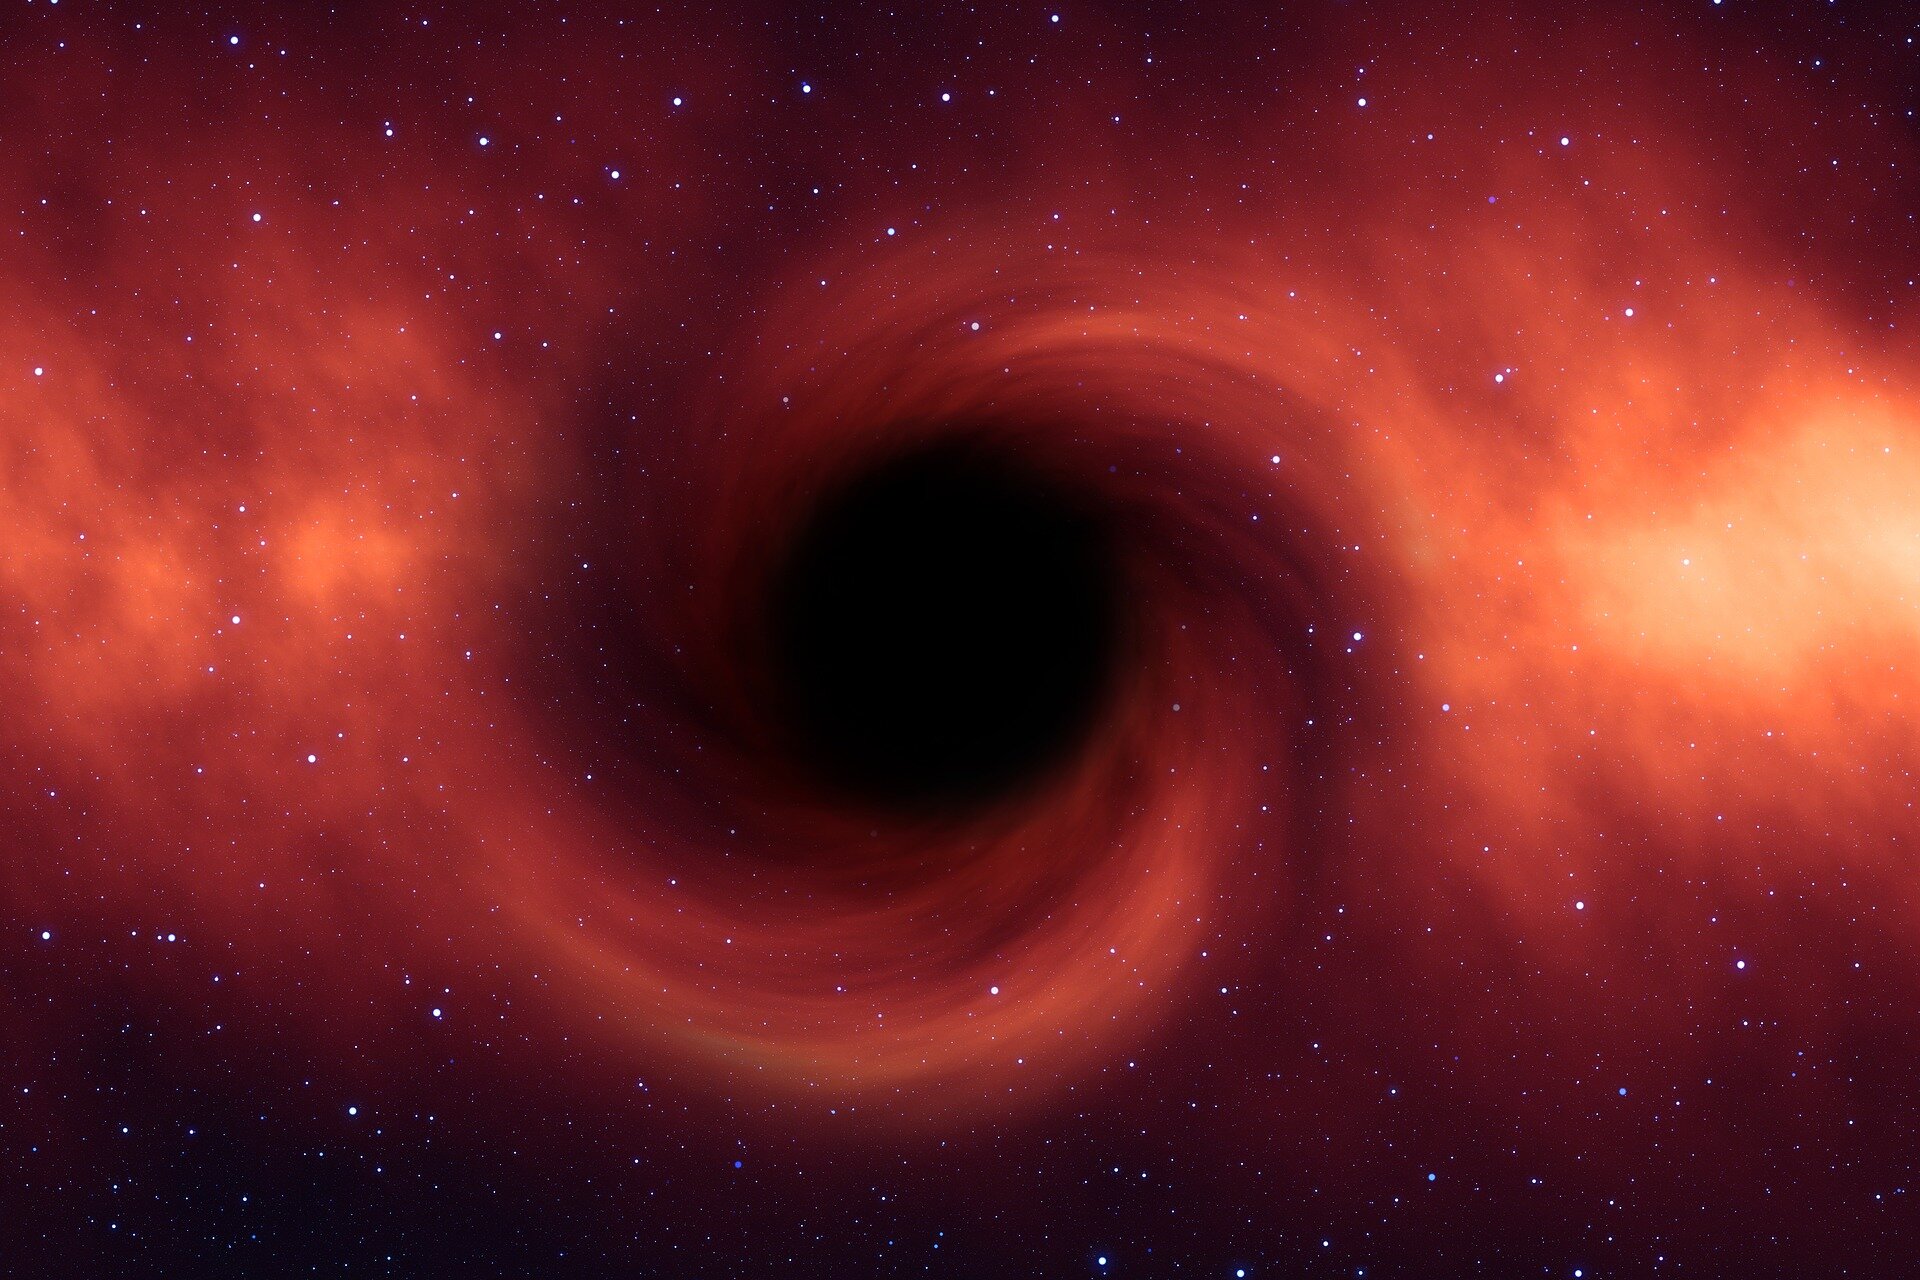 'Wobbling black hole' most extreme example ever detected